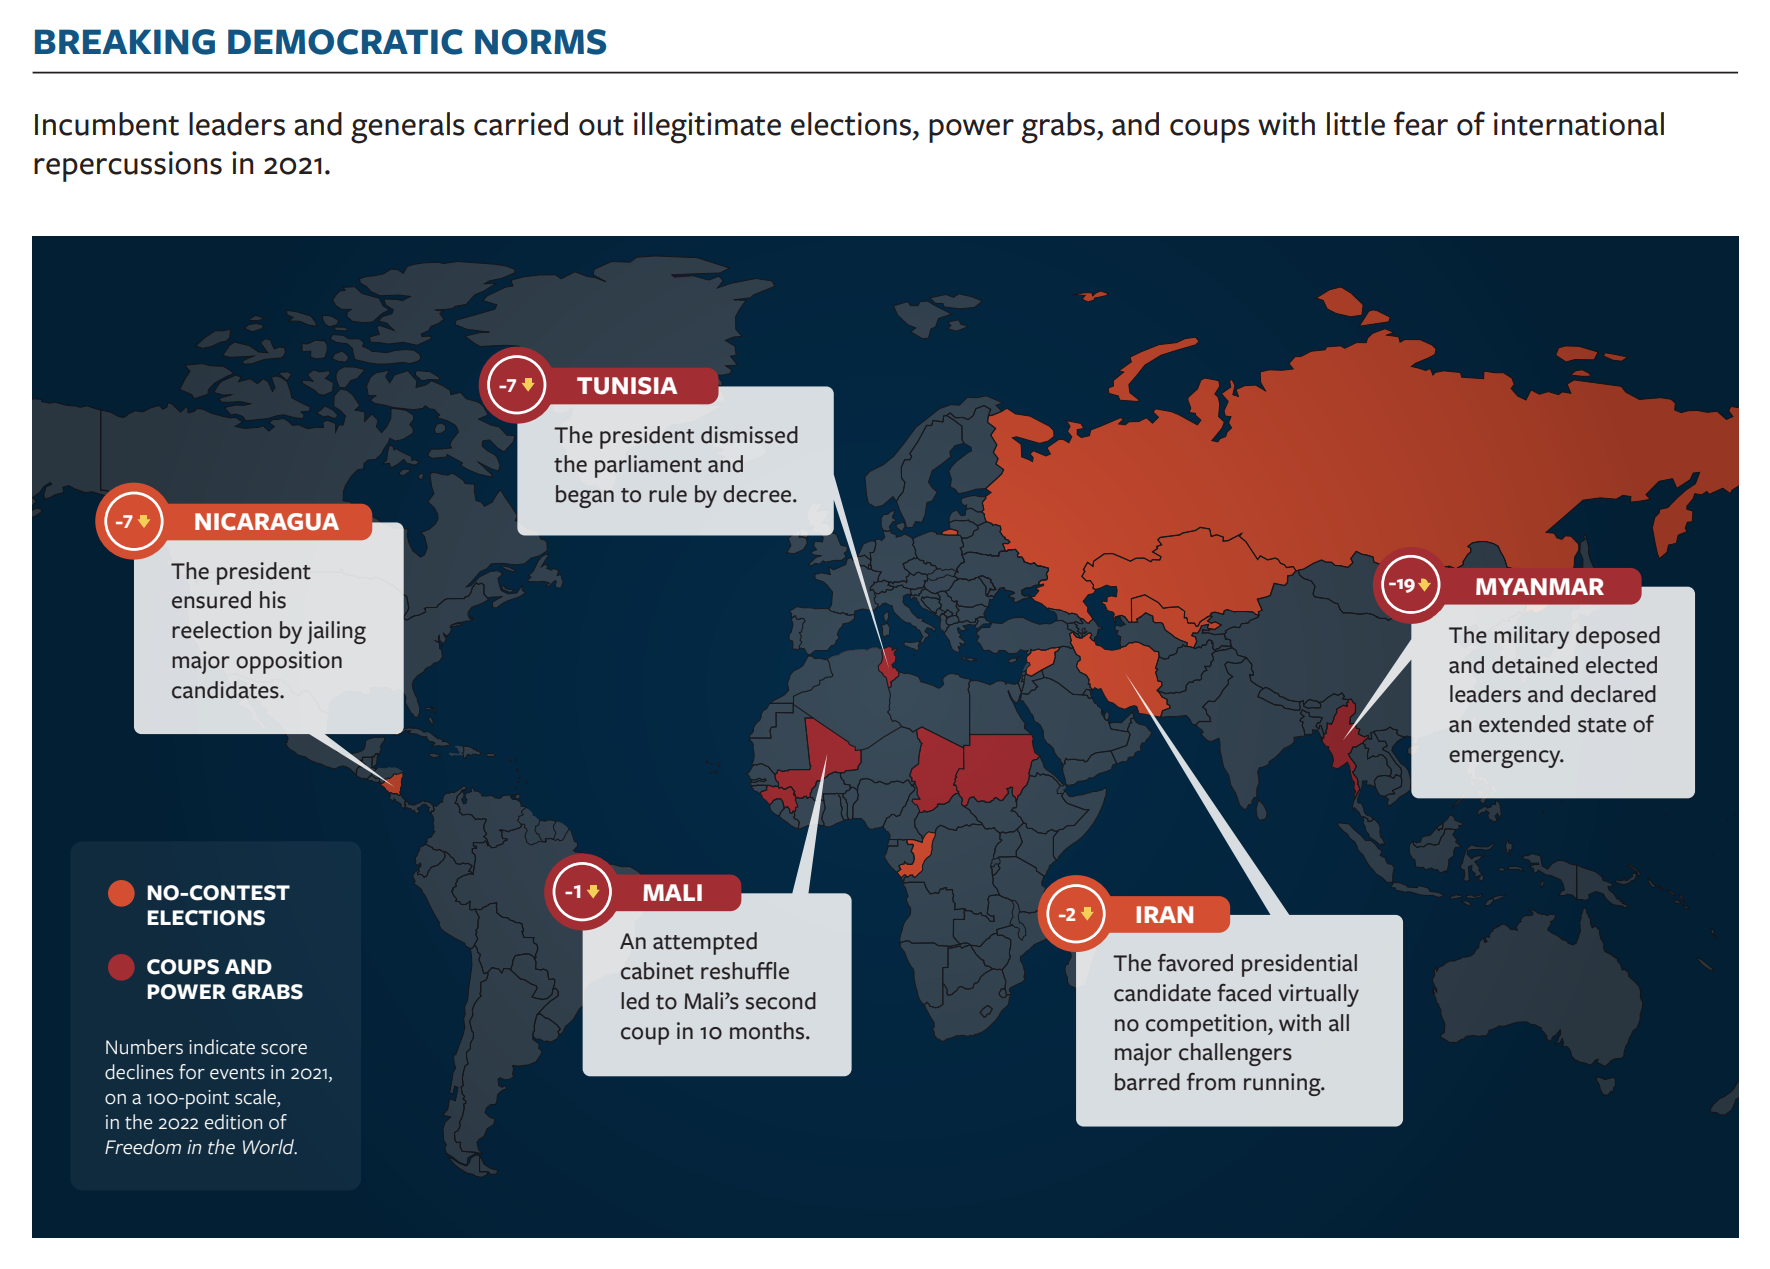 Map showing no-contest elections, coups, and power grabs globally in 2021. Numbers indicate score declines for events in 2021, on a 100-point scale, in the 2022 edition of the “Freedom in the World” report. Coups were more common in 2021 than in any of the previous 10 years. Graphic: Freedom House